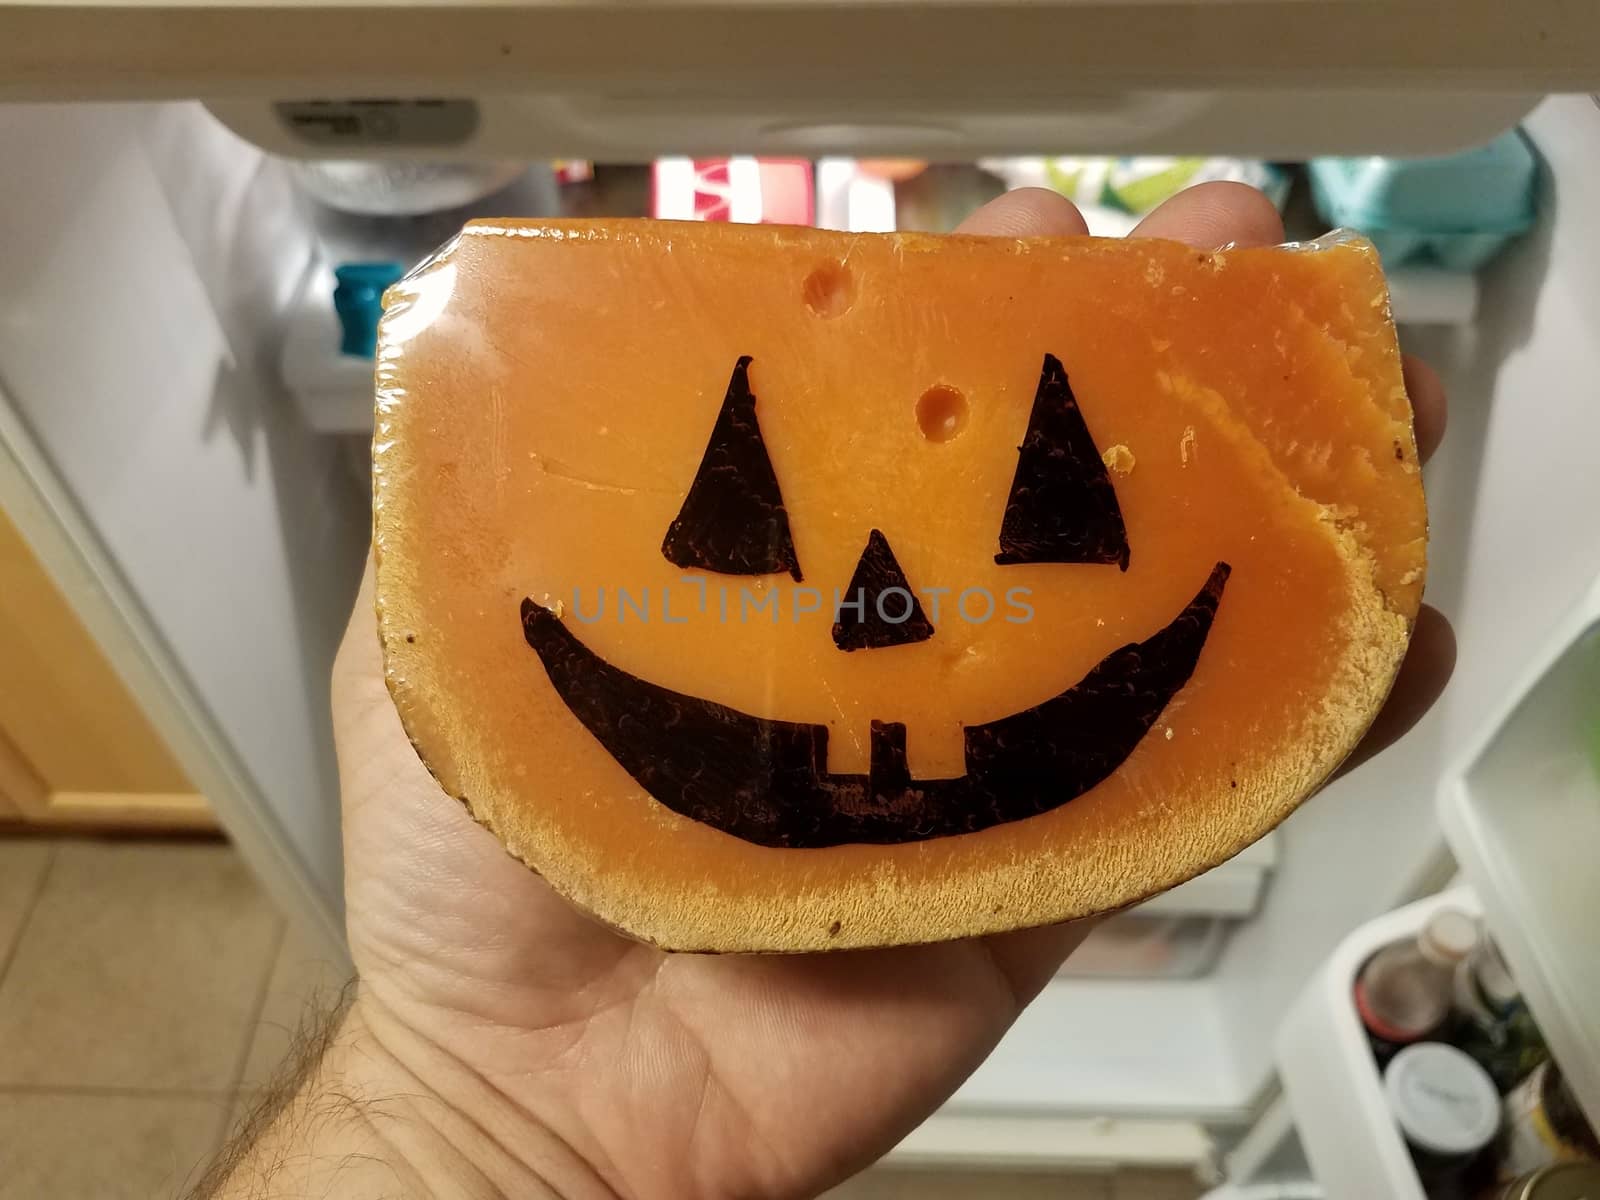 orange cheese with Halloween pumpkin face and hand in refrigerator